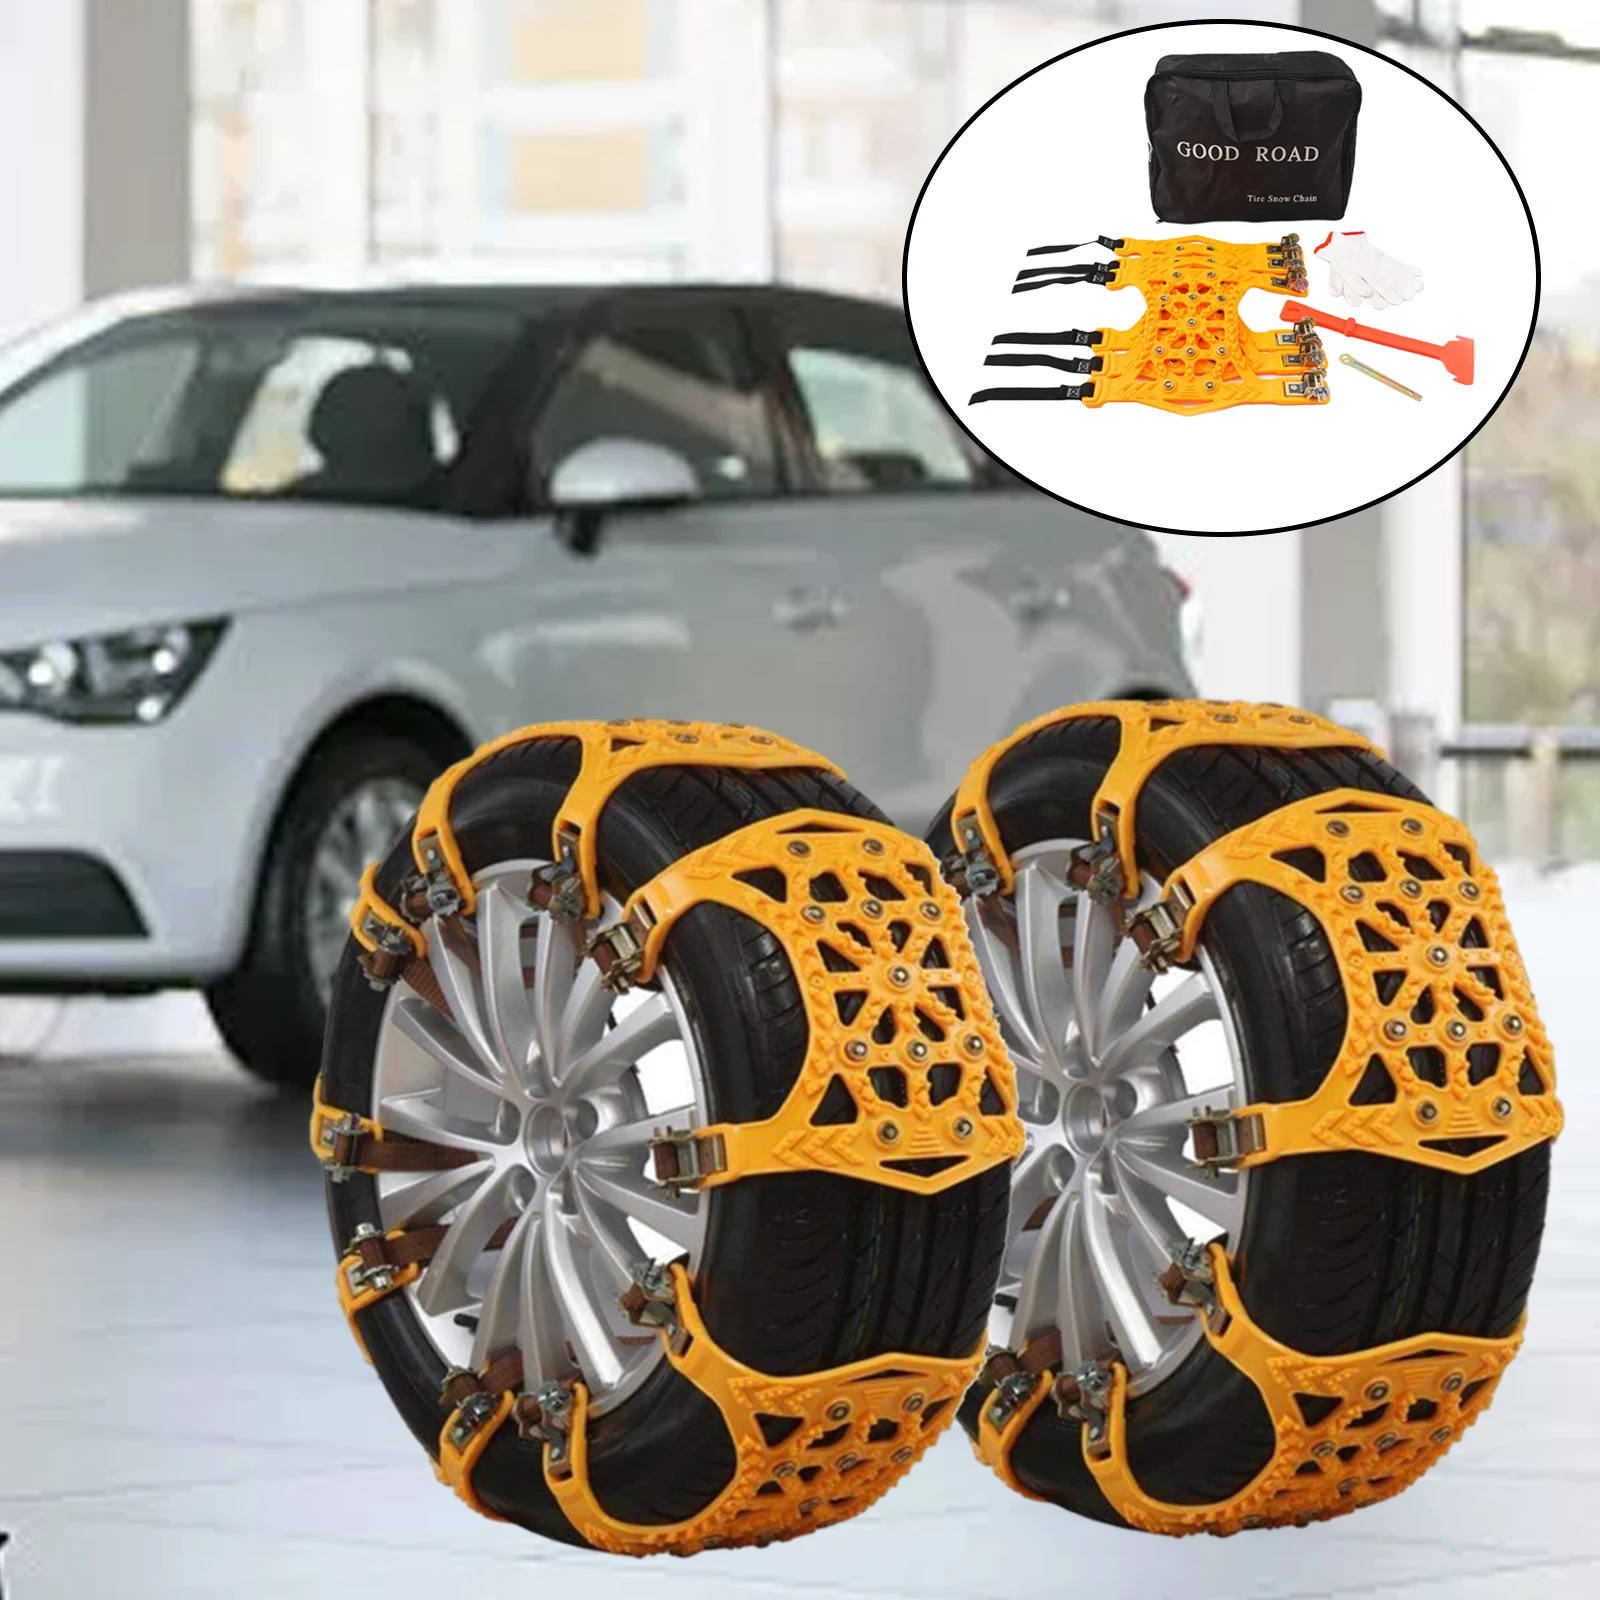 6x Snow Chains, Applicable Tire Width 165-265mm Upgrade Tire Chain Belt for Snowy Roads Winter Driving Muddy Roads Emergencies